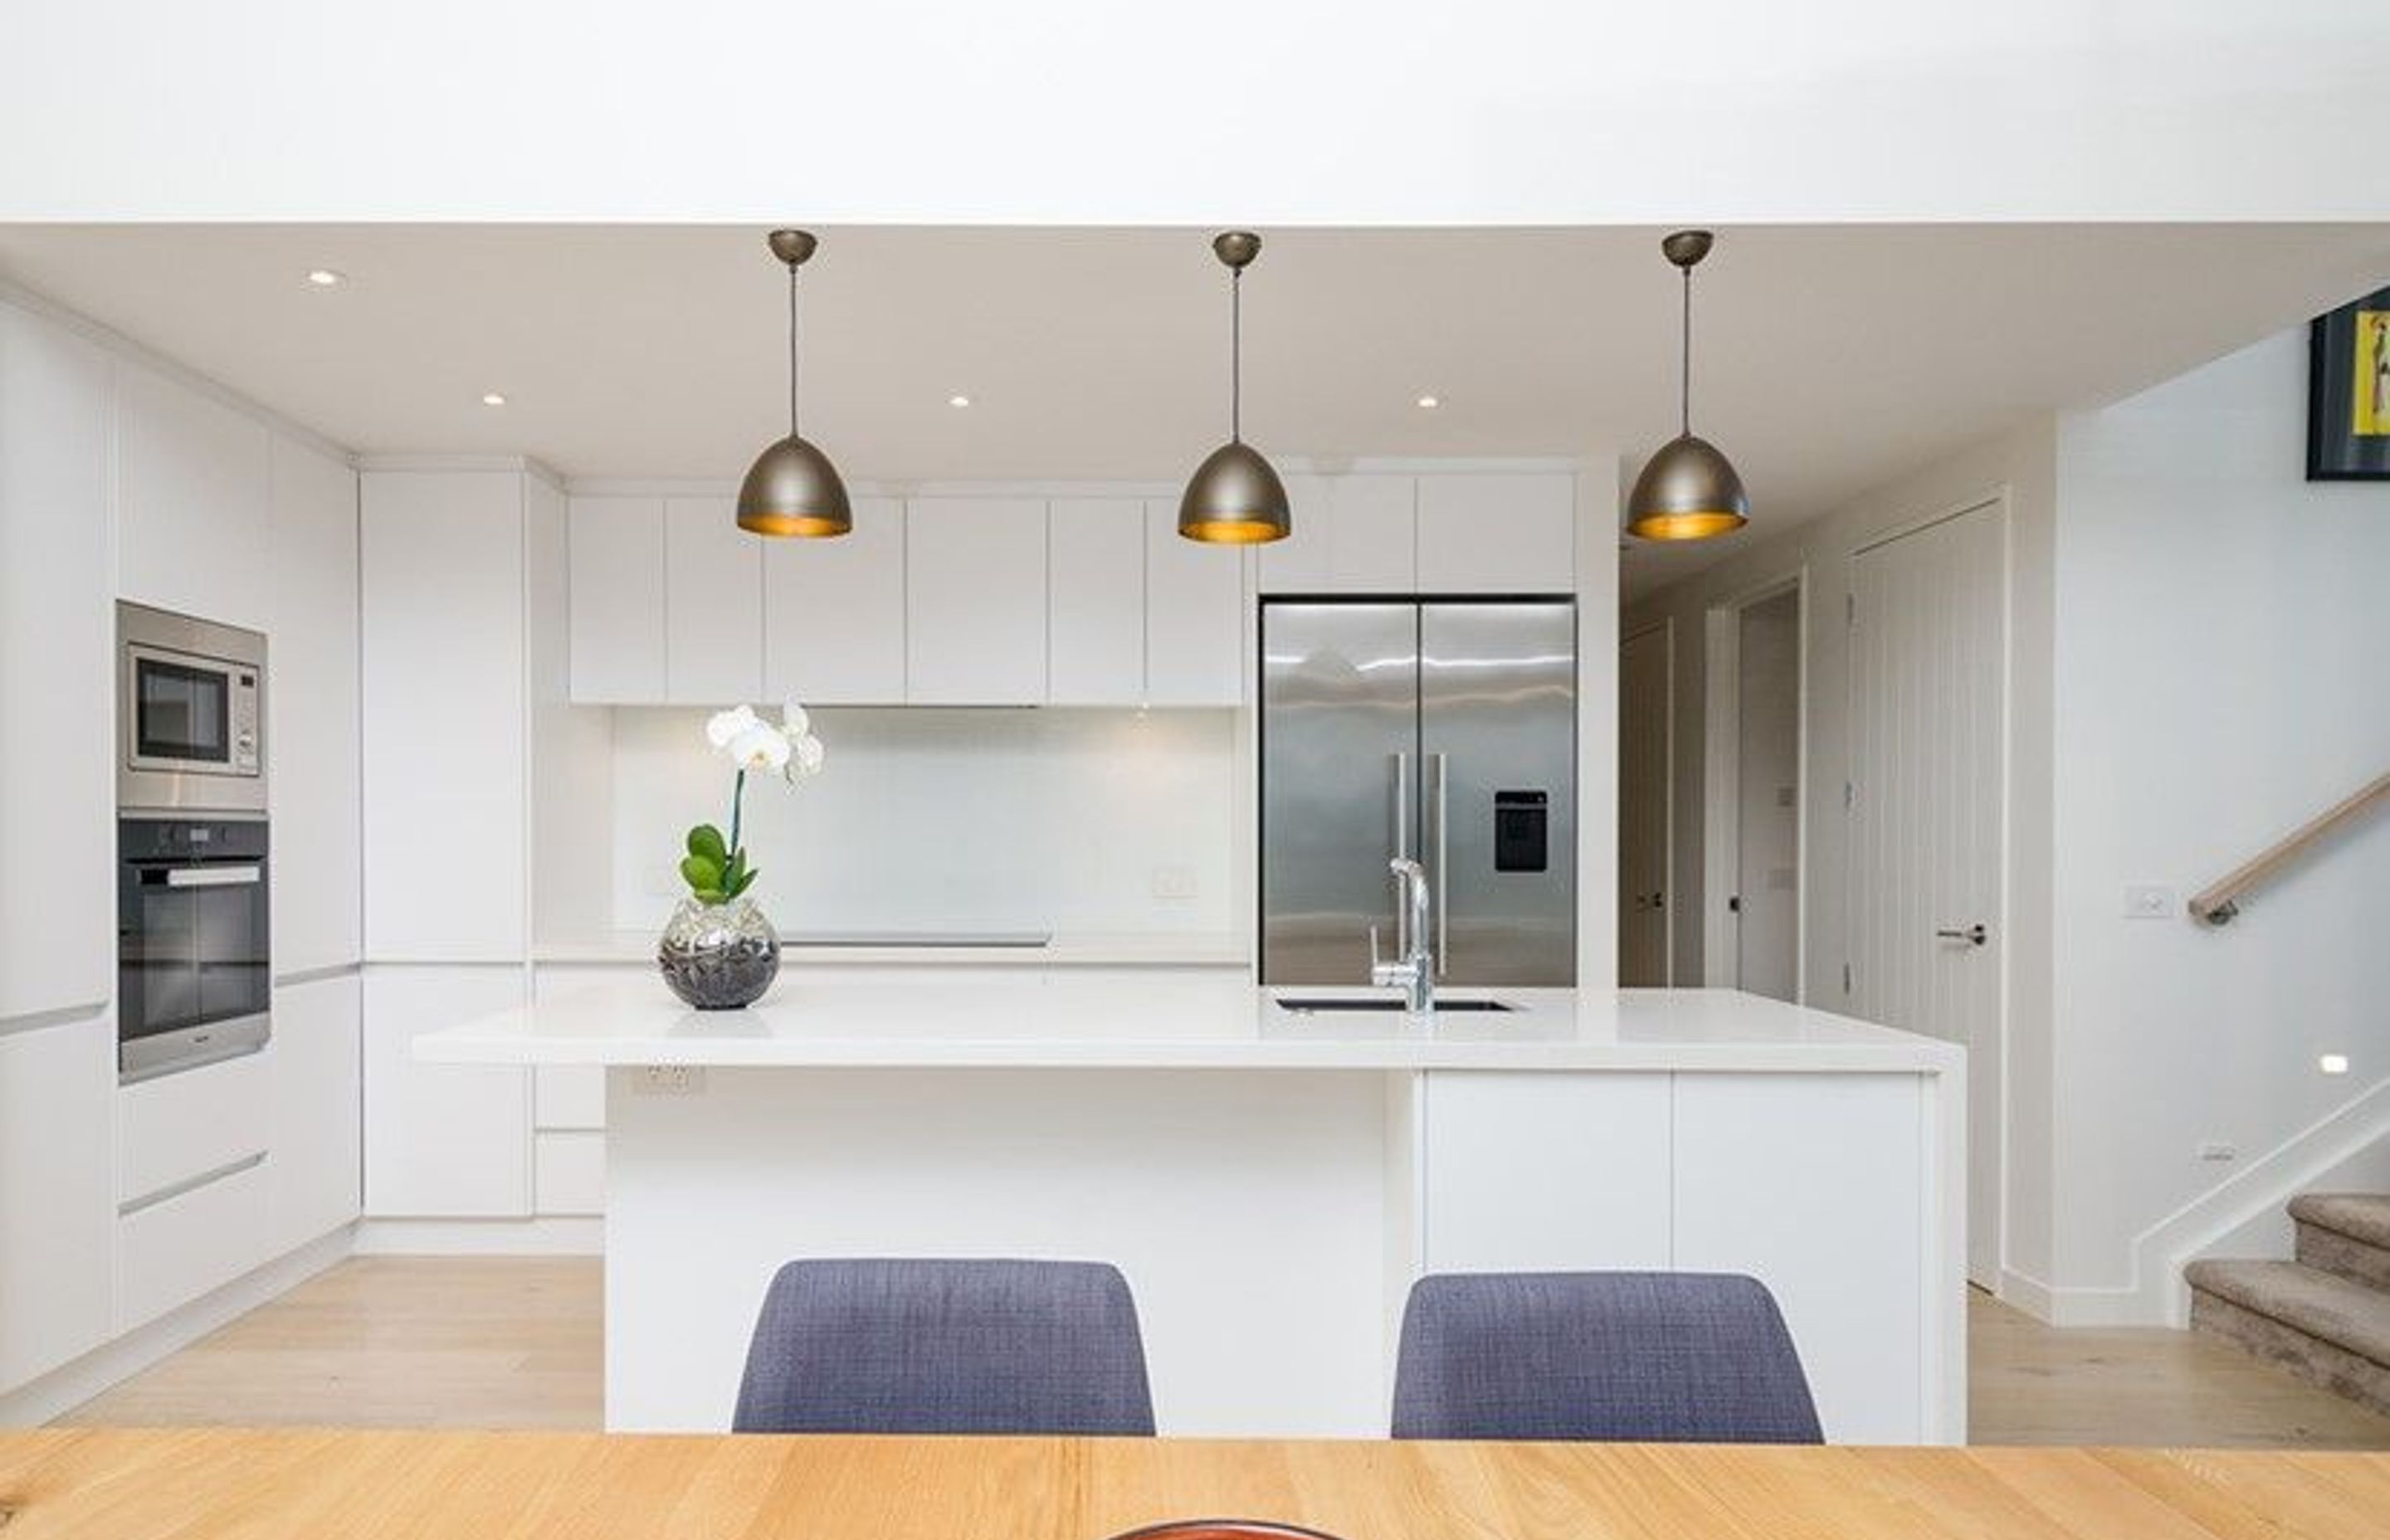 Hobsonville Pt Home - Solid American White Oak flooring finished w/ Bona Stain in 'White' + Waterborne Polyurethane